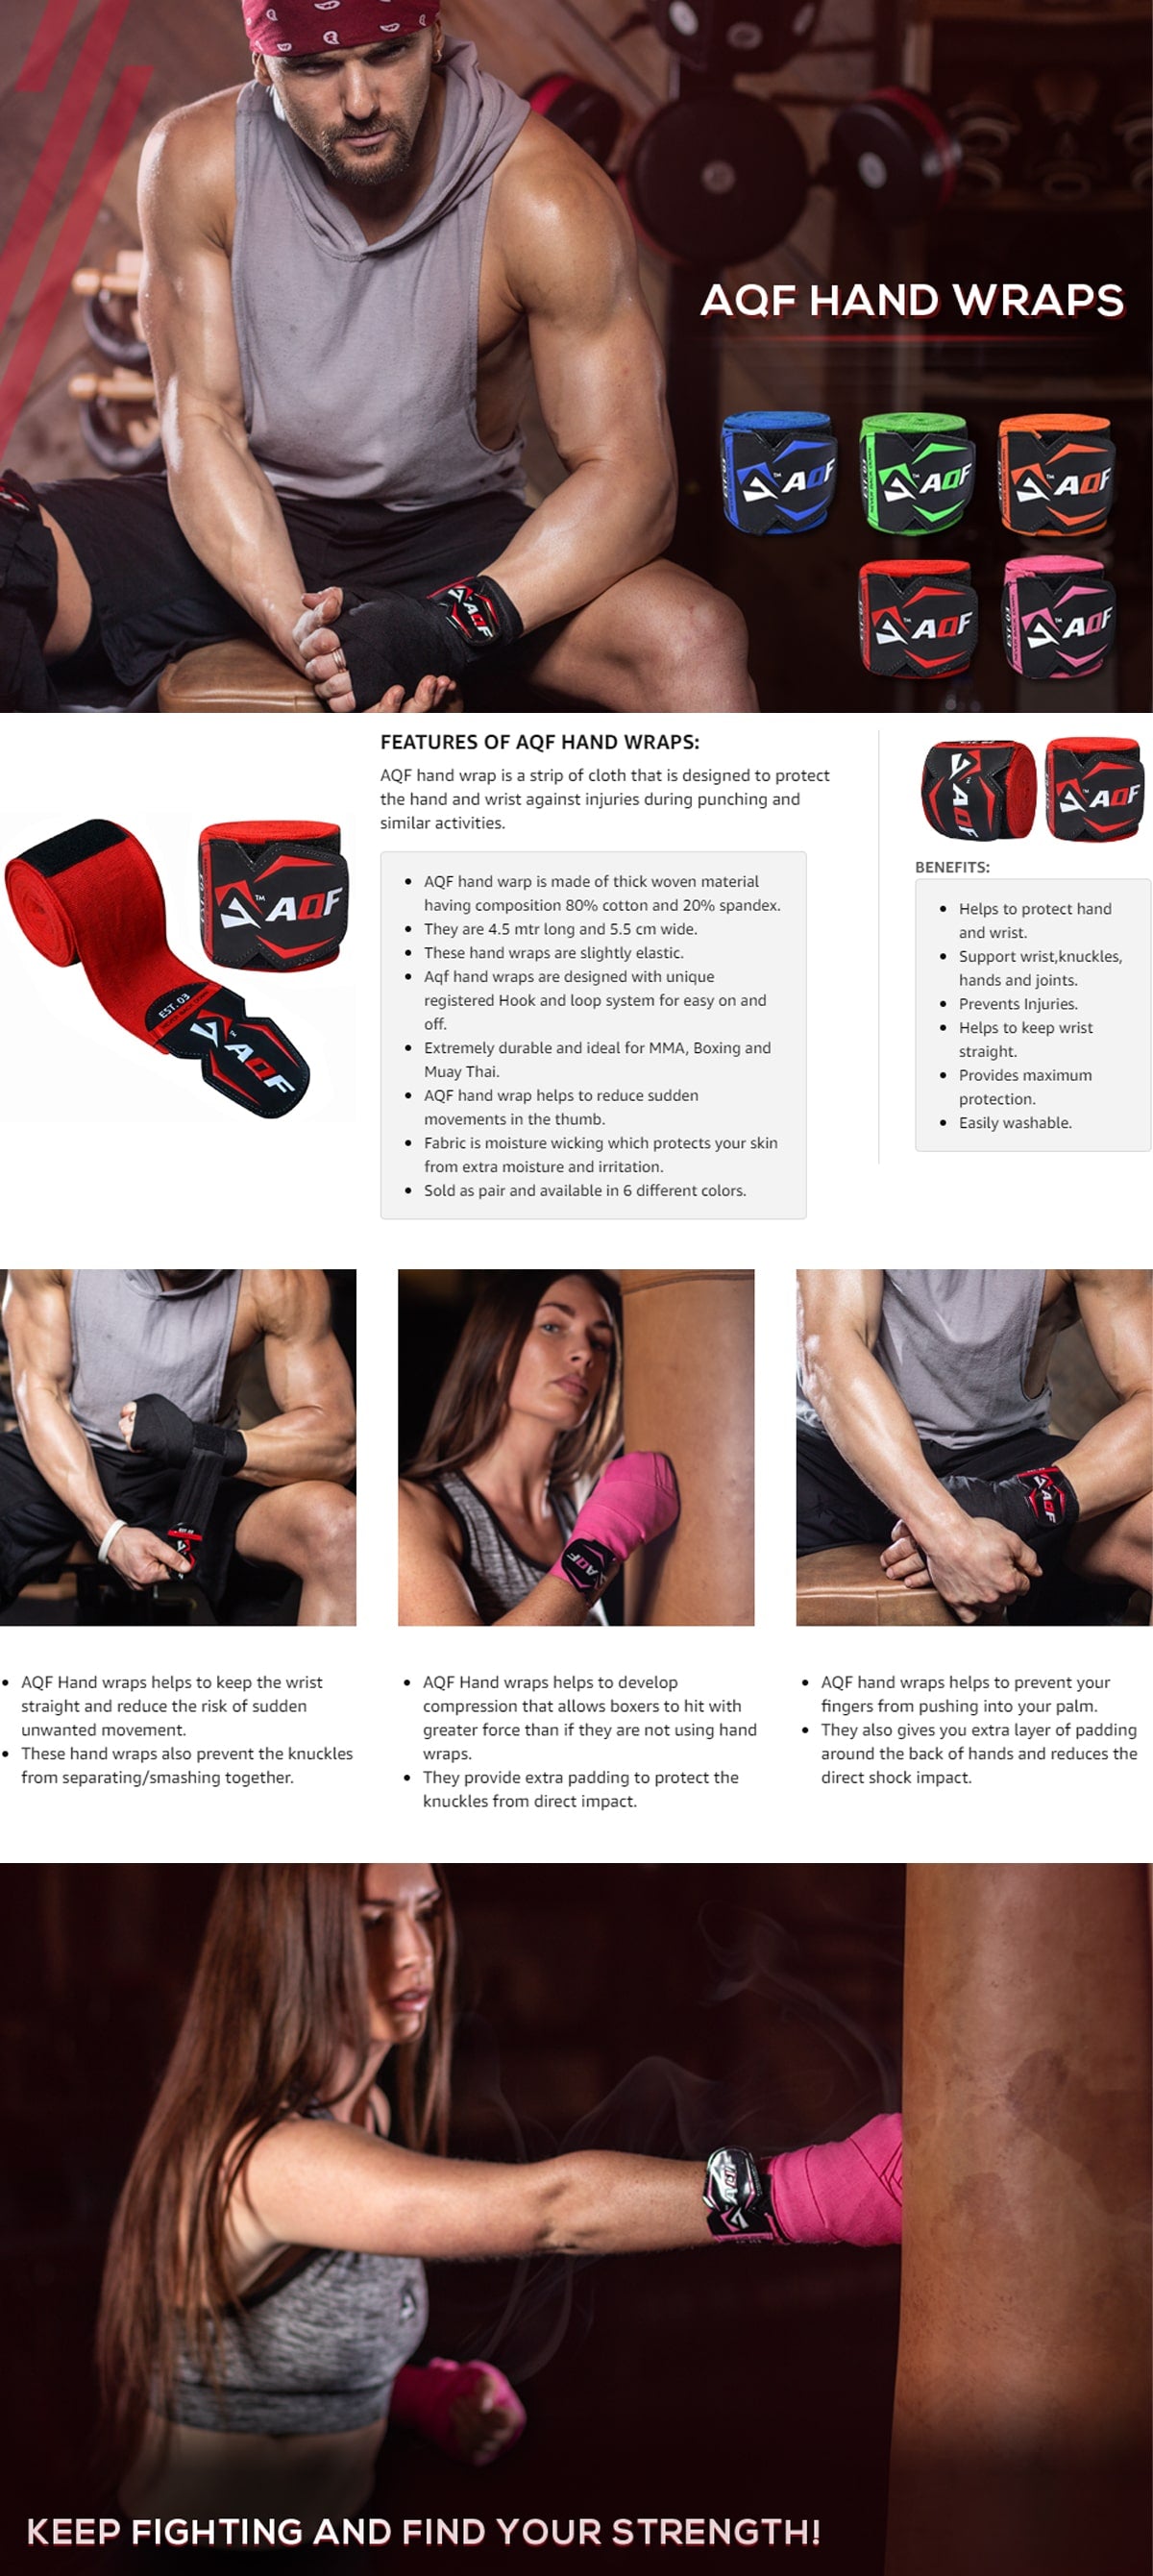 Features of AQF Hand Wraps